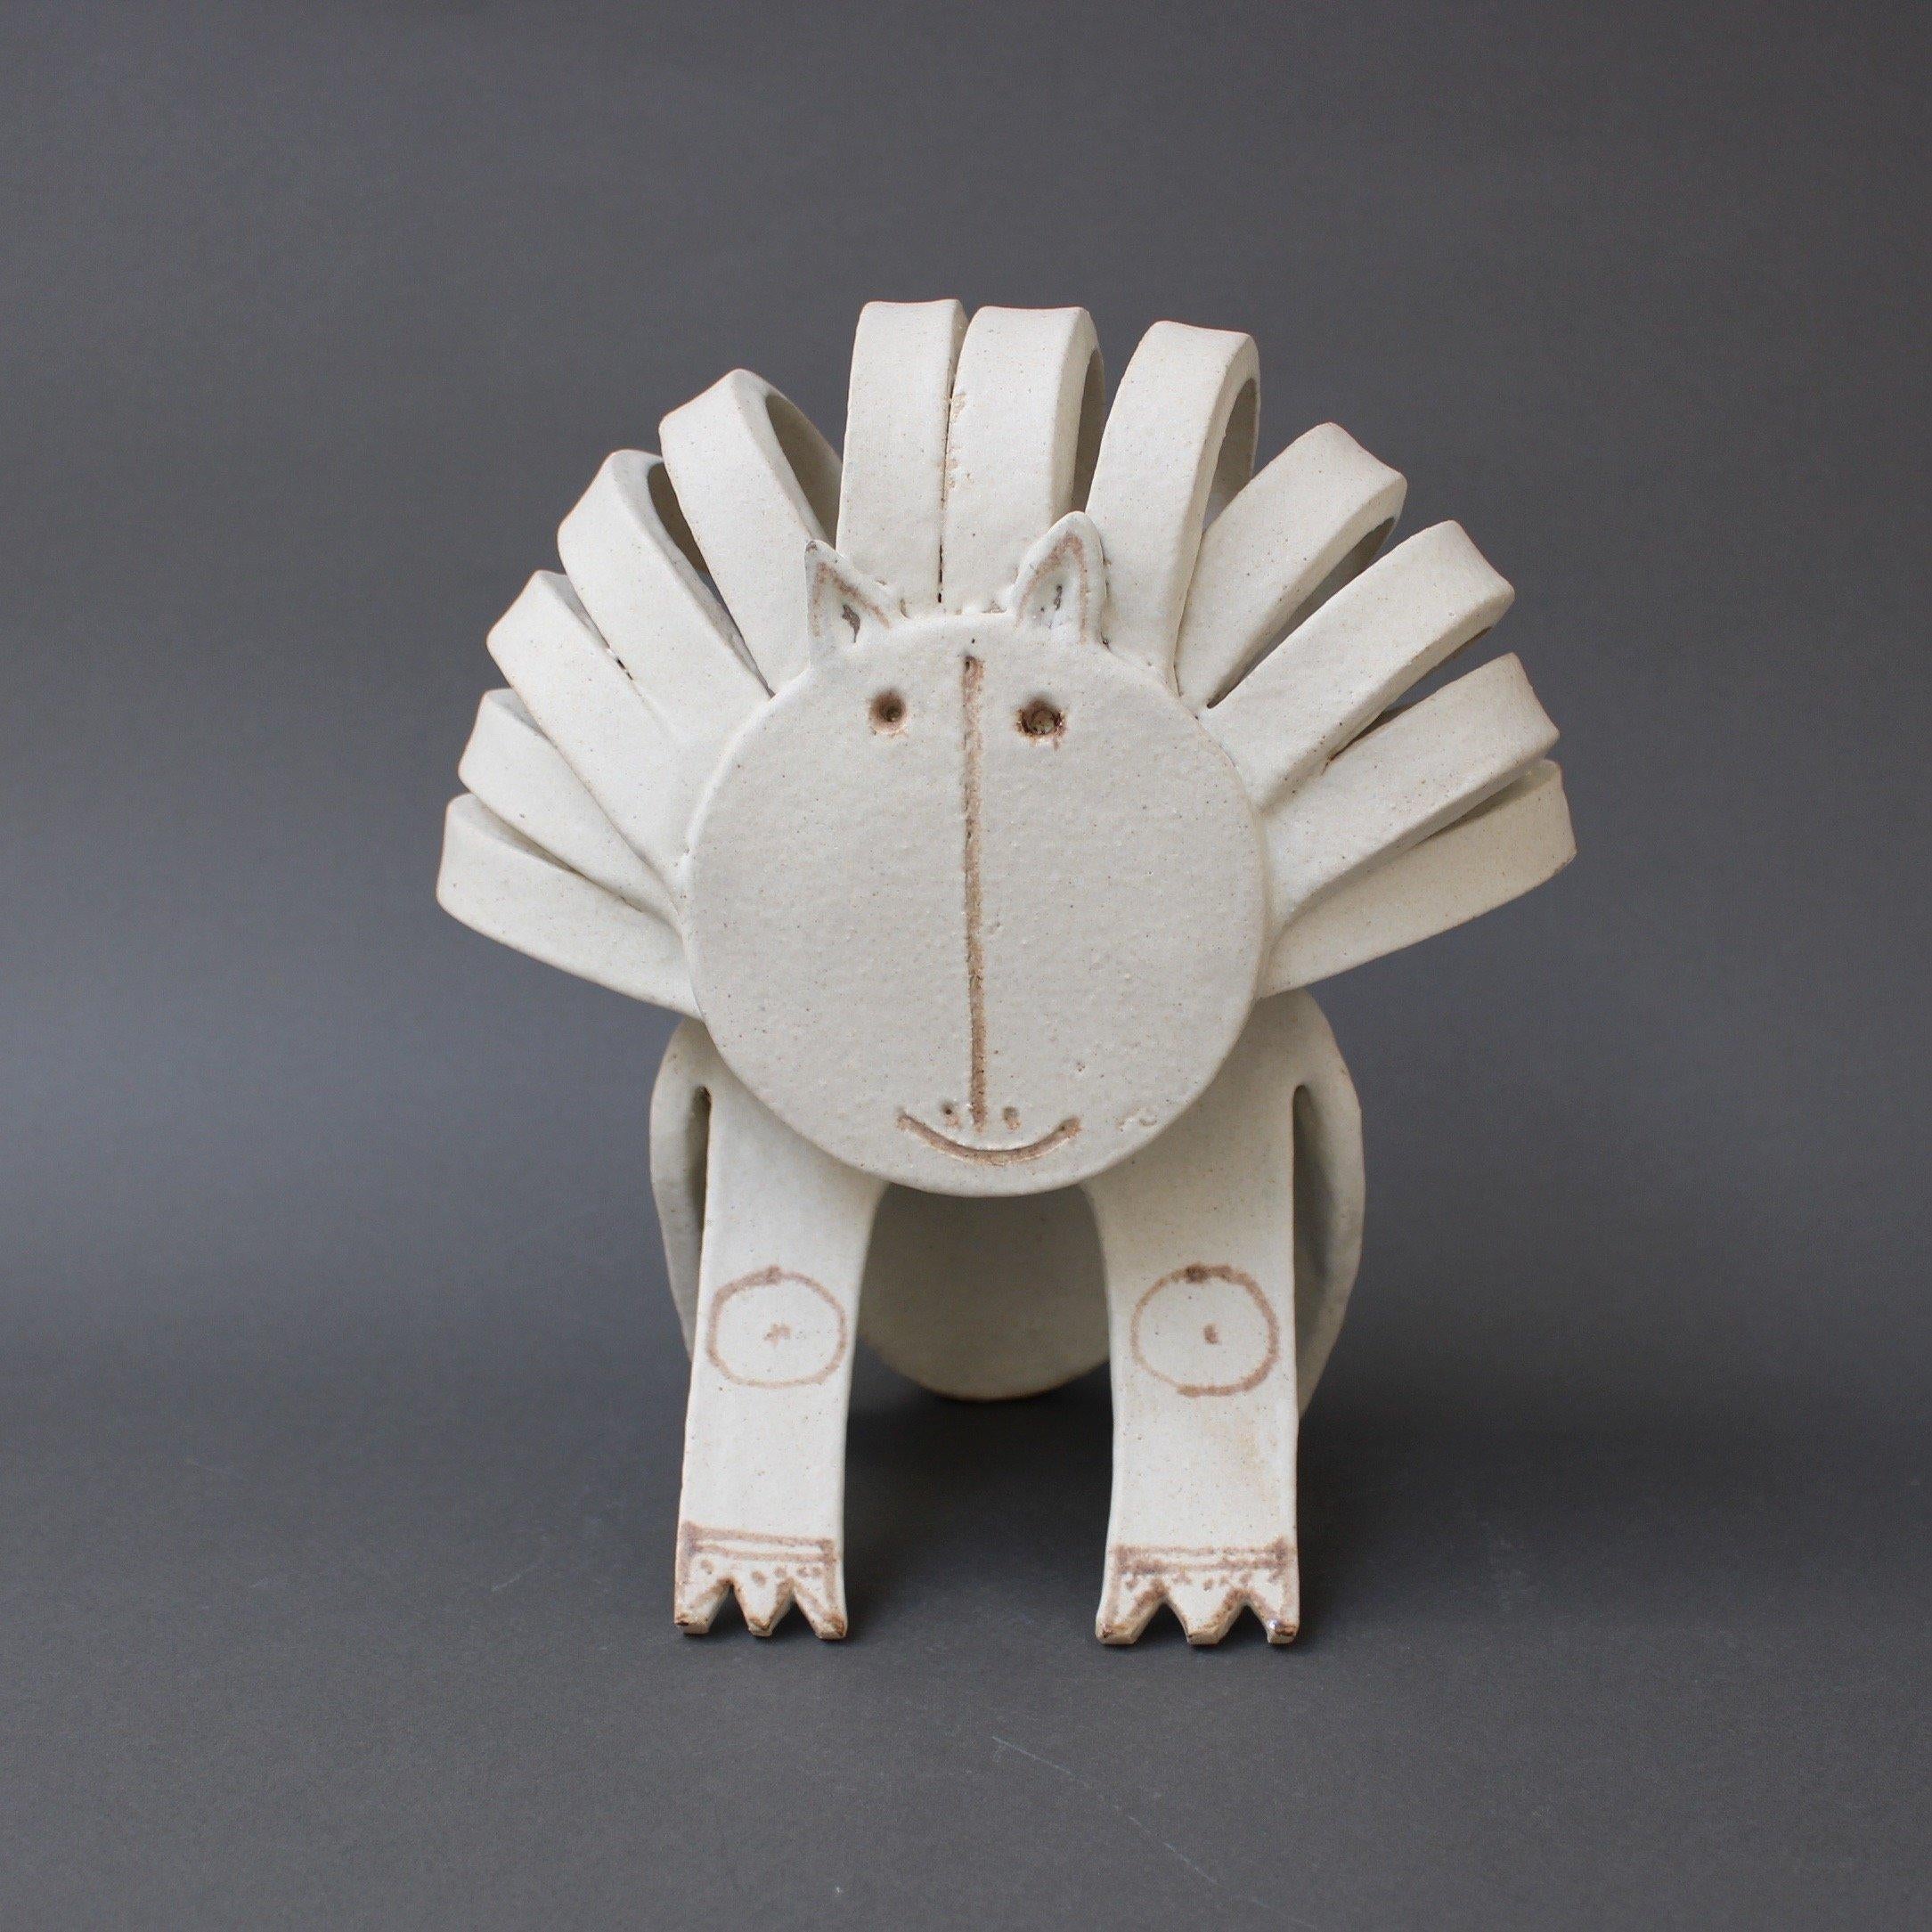 Ceramic cat or lion sculpture by ceramicist Bruno Gambone (circa 1970s). This enchanting cat is a delightful work of art. It is whimsical, yet beautiful in its use of the pared-down design elements associated with minimalism. Its chalk-white colour